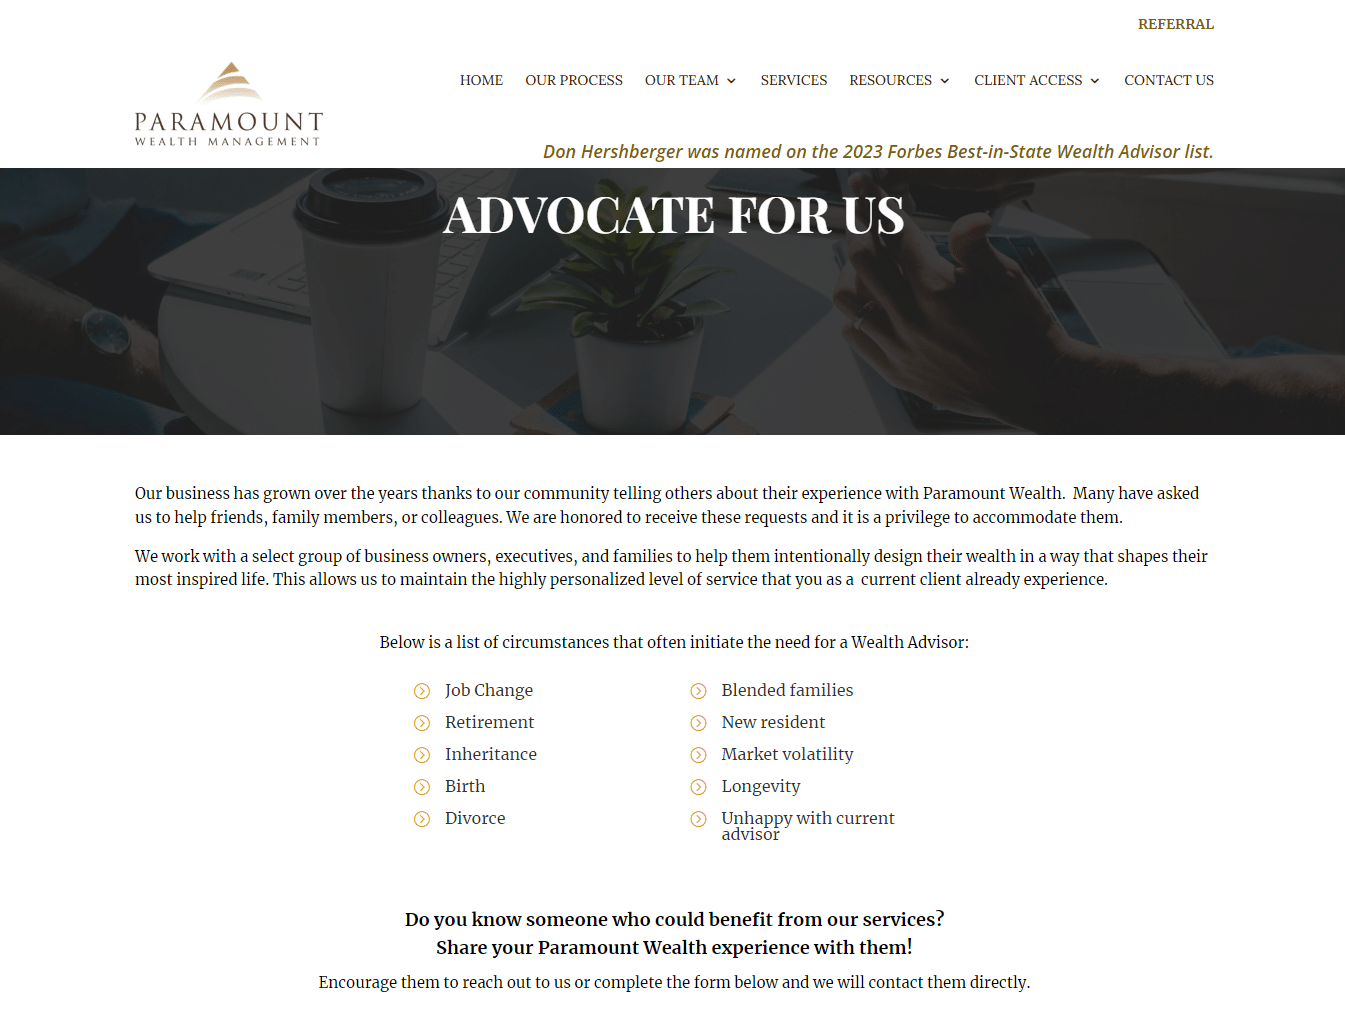 paramount wealth management advocate for us